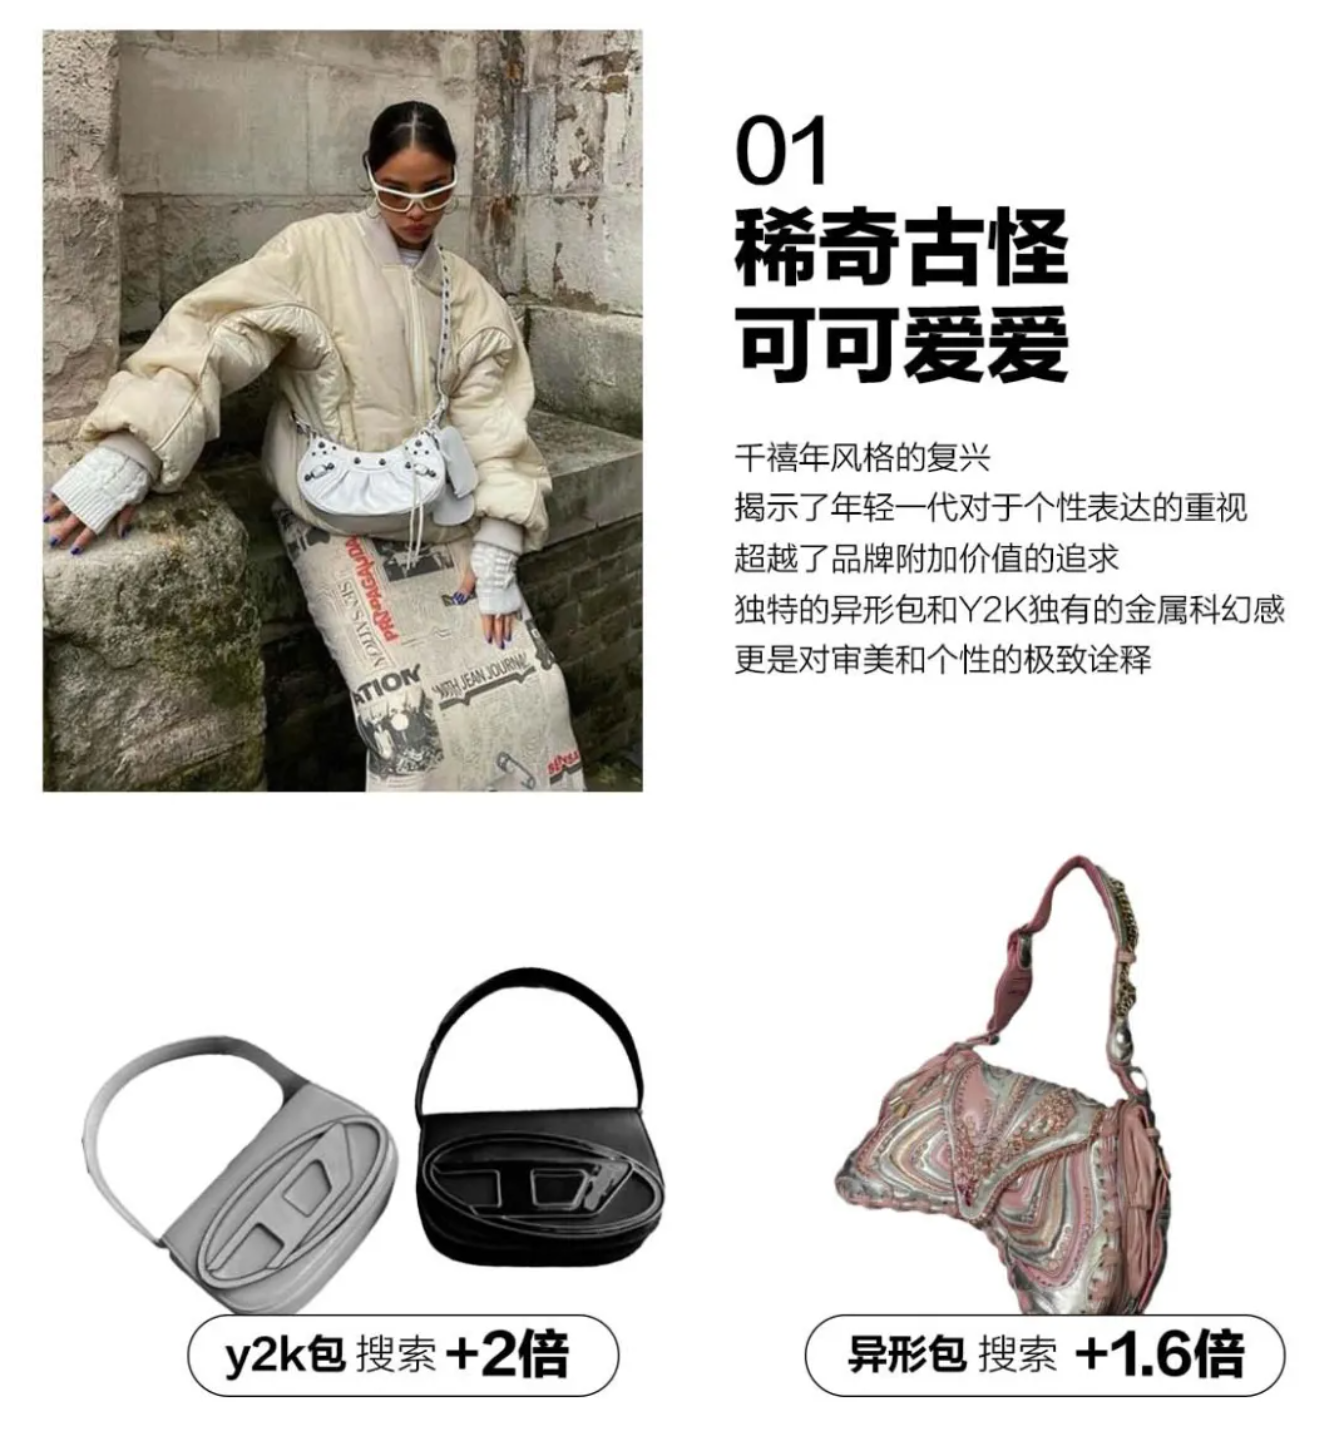 Diesel’s 1DR bag and Balenciaga’s Motorcycle bag are proving popular among young shoppers in China. Image: Xiaohongshu